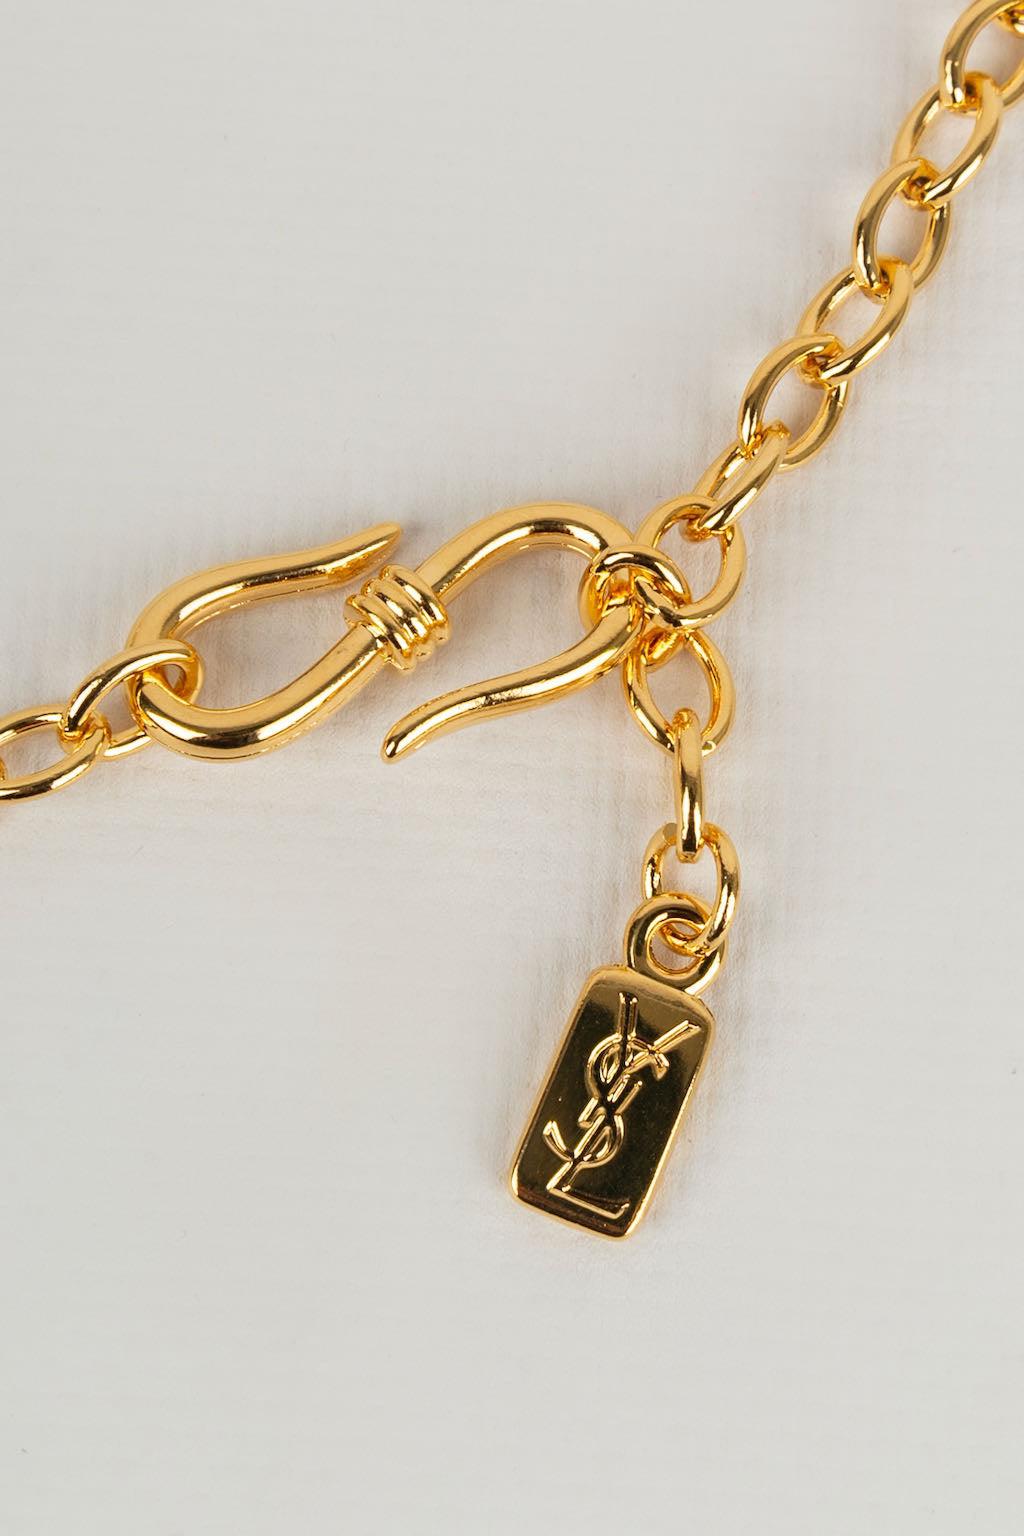 Yves Saint Laurent Necklace in Gold Metal For Sale 1